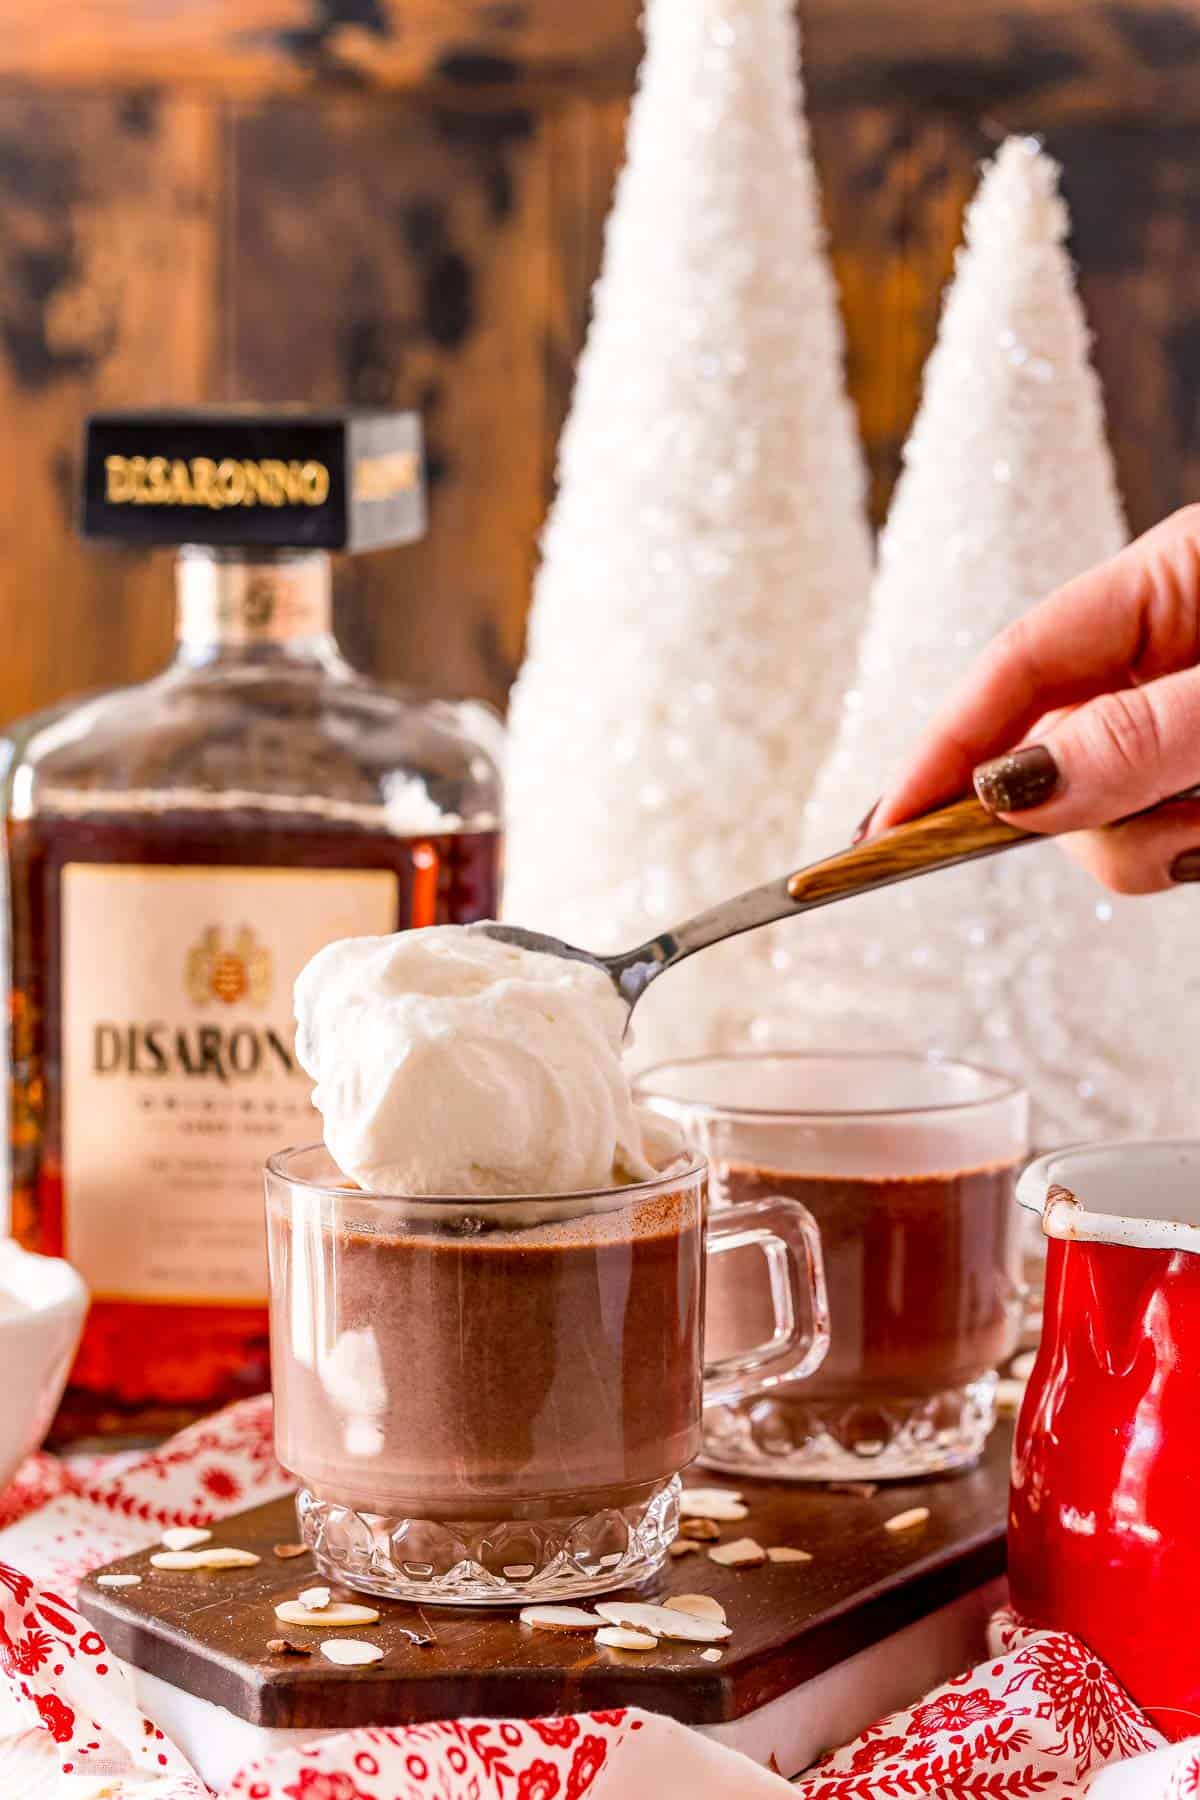 Whipped cream being added to hot chocolate.